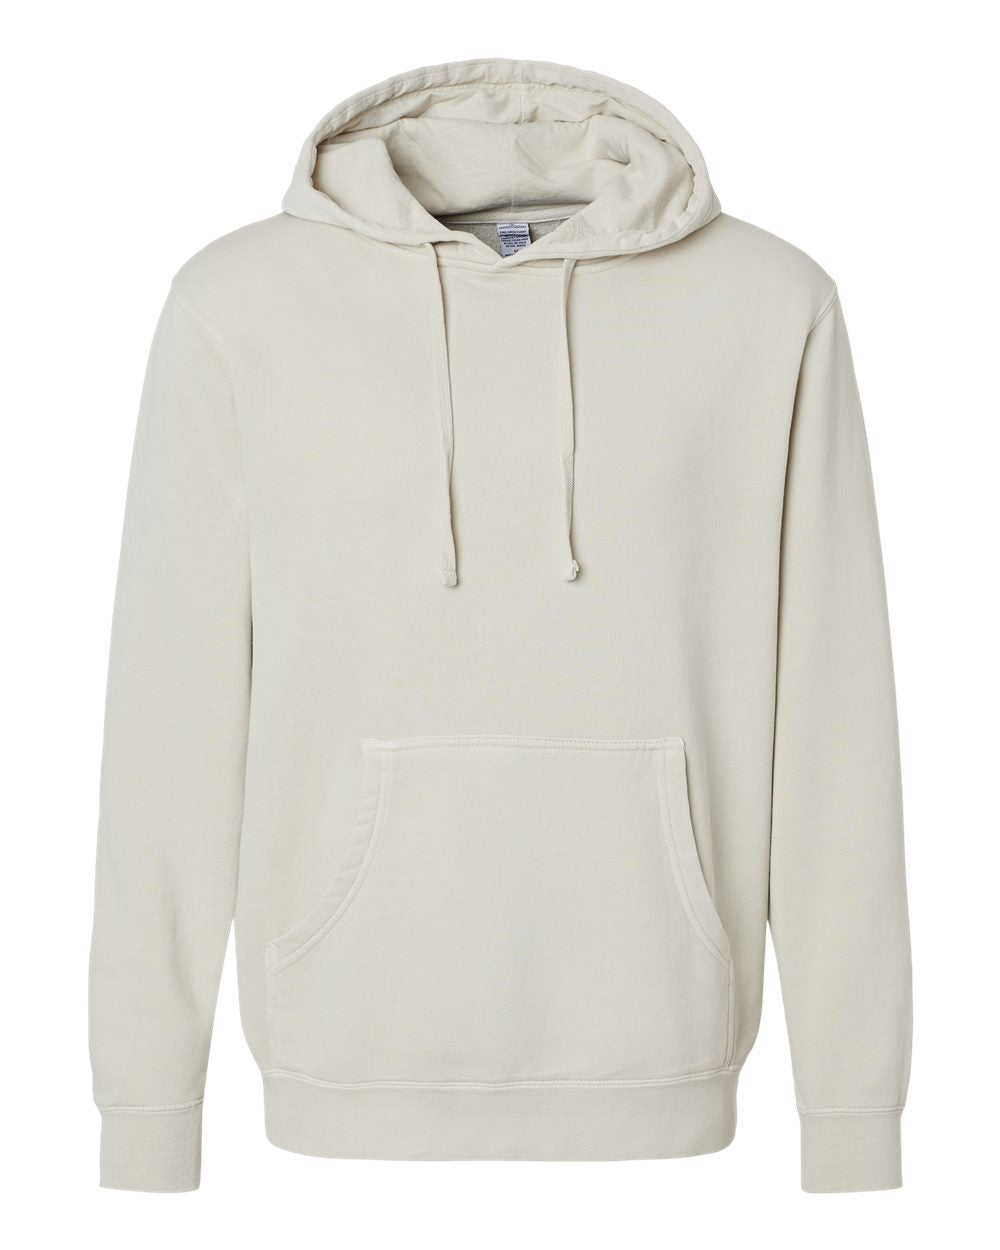 Independent Pigment-Dyed Hoodie (PRM4500) in Pigment Ivory